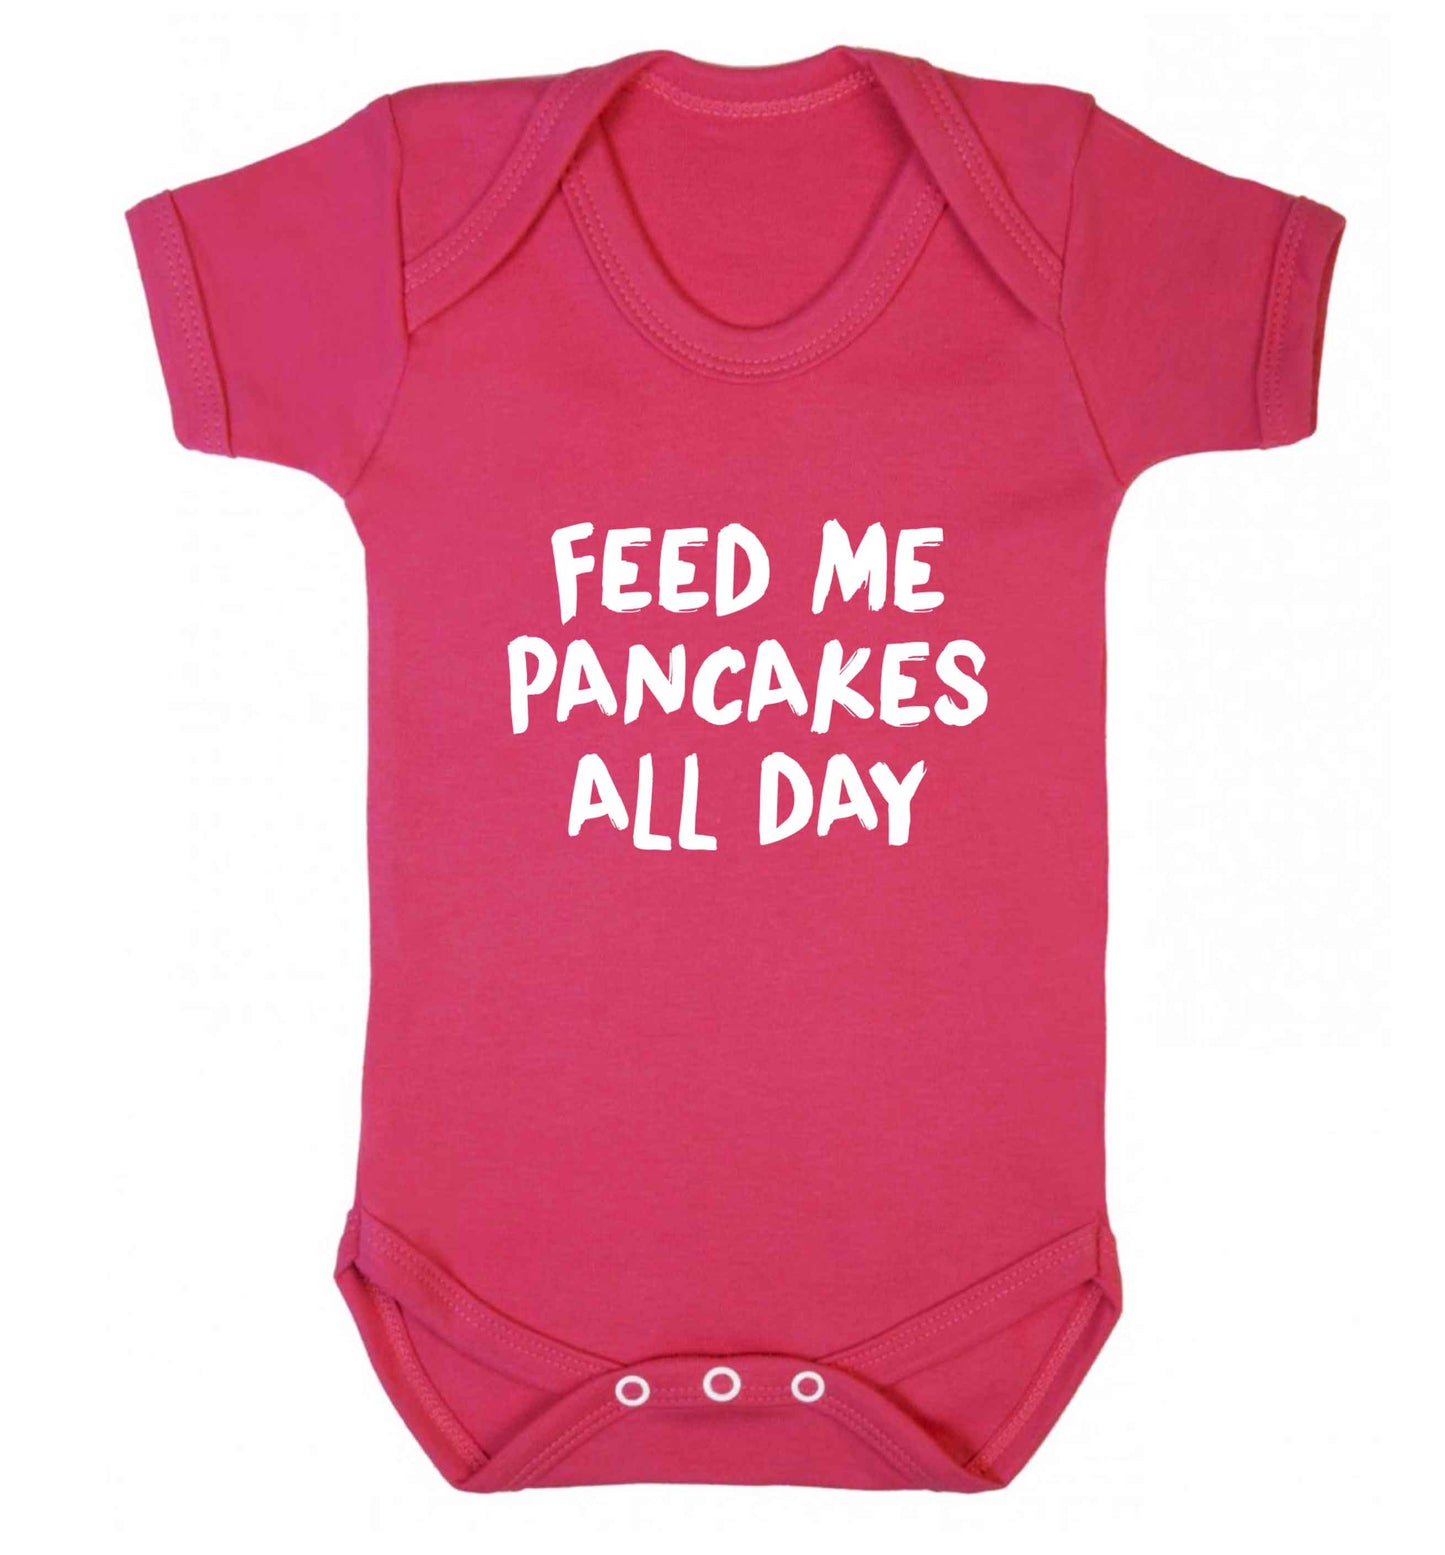 Feed me pancakes all day baby vest dark pink 18-24 months